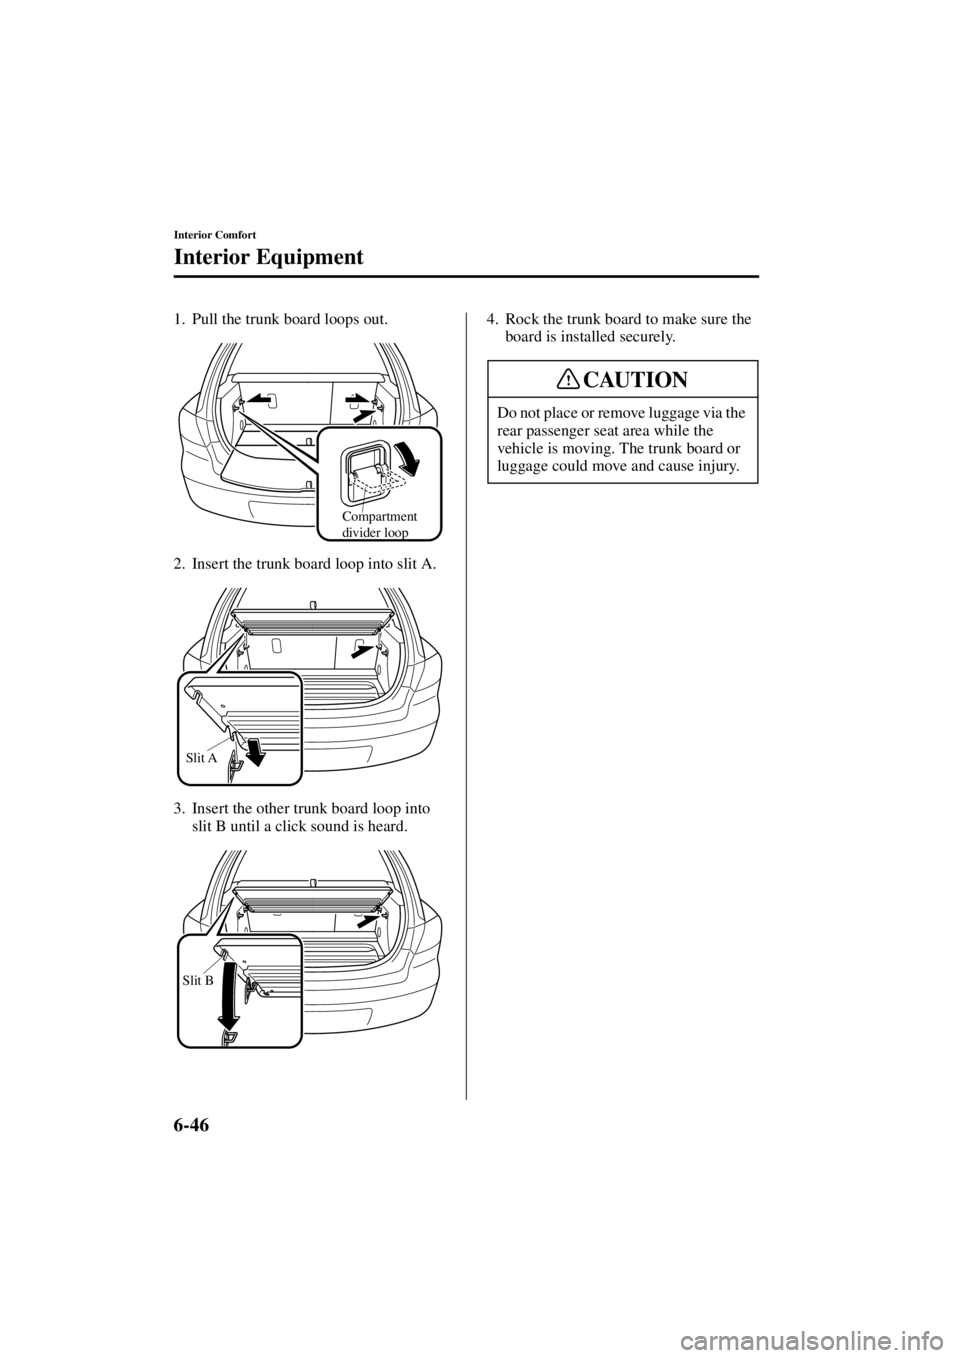 MAZDA MODEL 3 5-DOOR 2004 User Guide 6-46
Interior Comfort
Interior Equipment
Form No. 8S18-EA-03I
1. Pull the trunk board loops out.
2. Insert the trunk board loop into slit A.
3. Insert the other trunk board loop into slit B until a cl